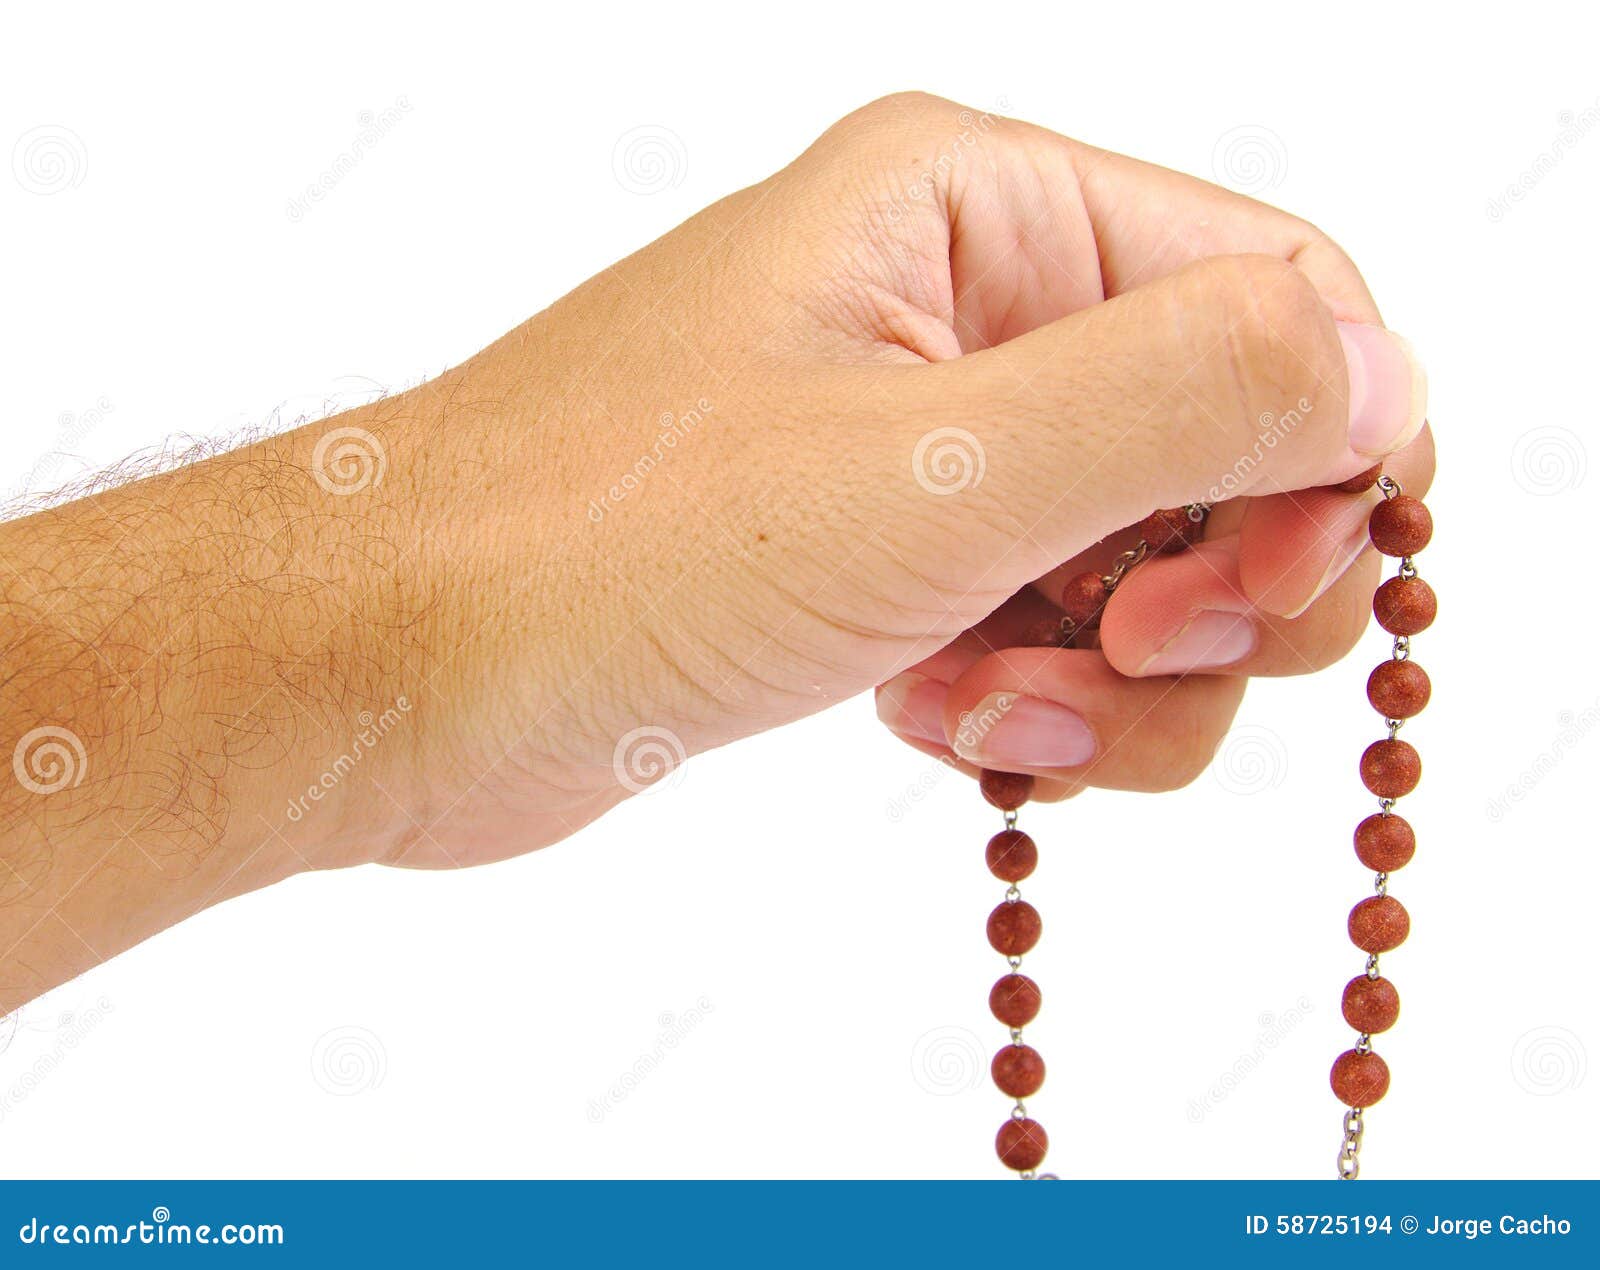 hands of a believer with wooden rosary